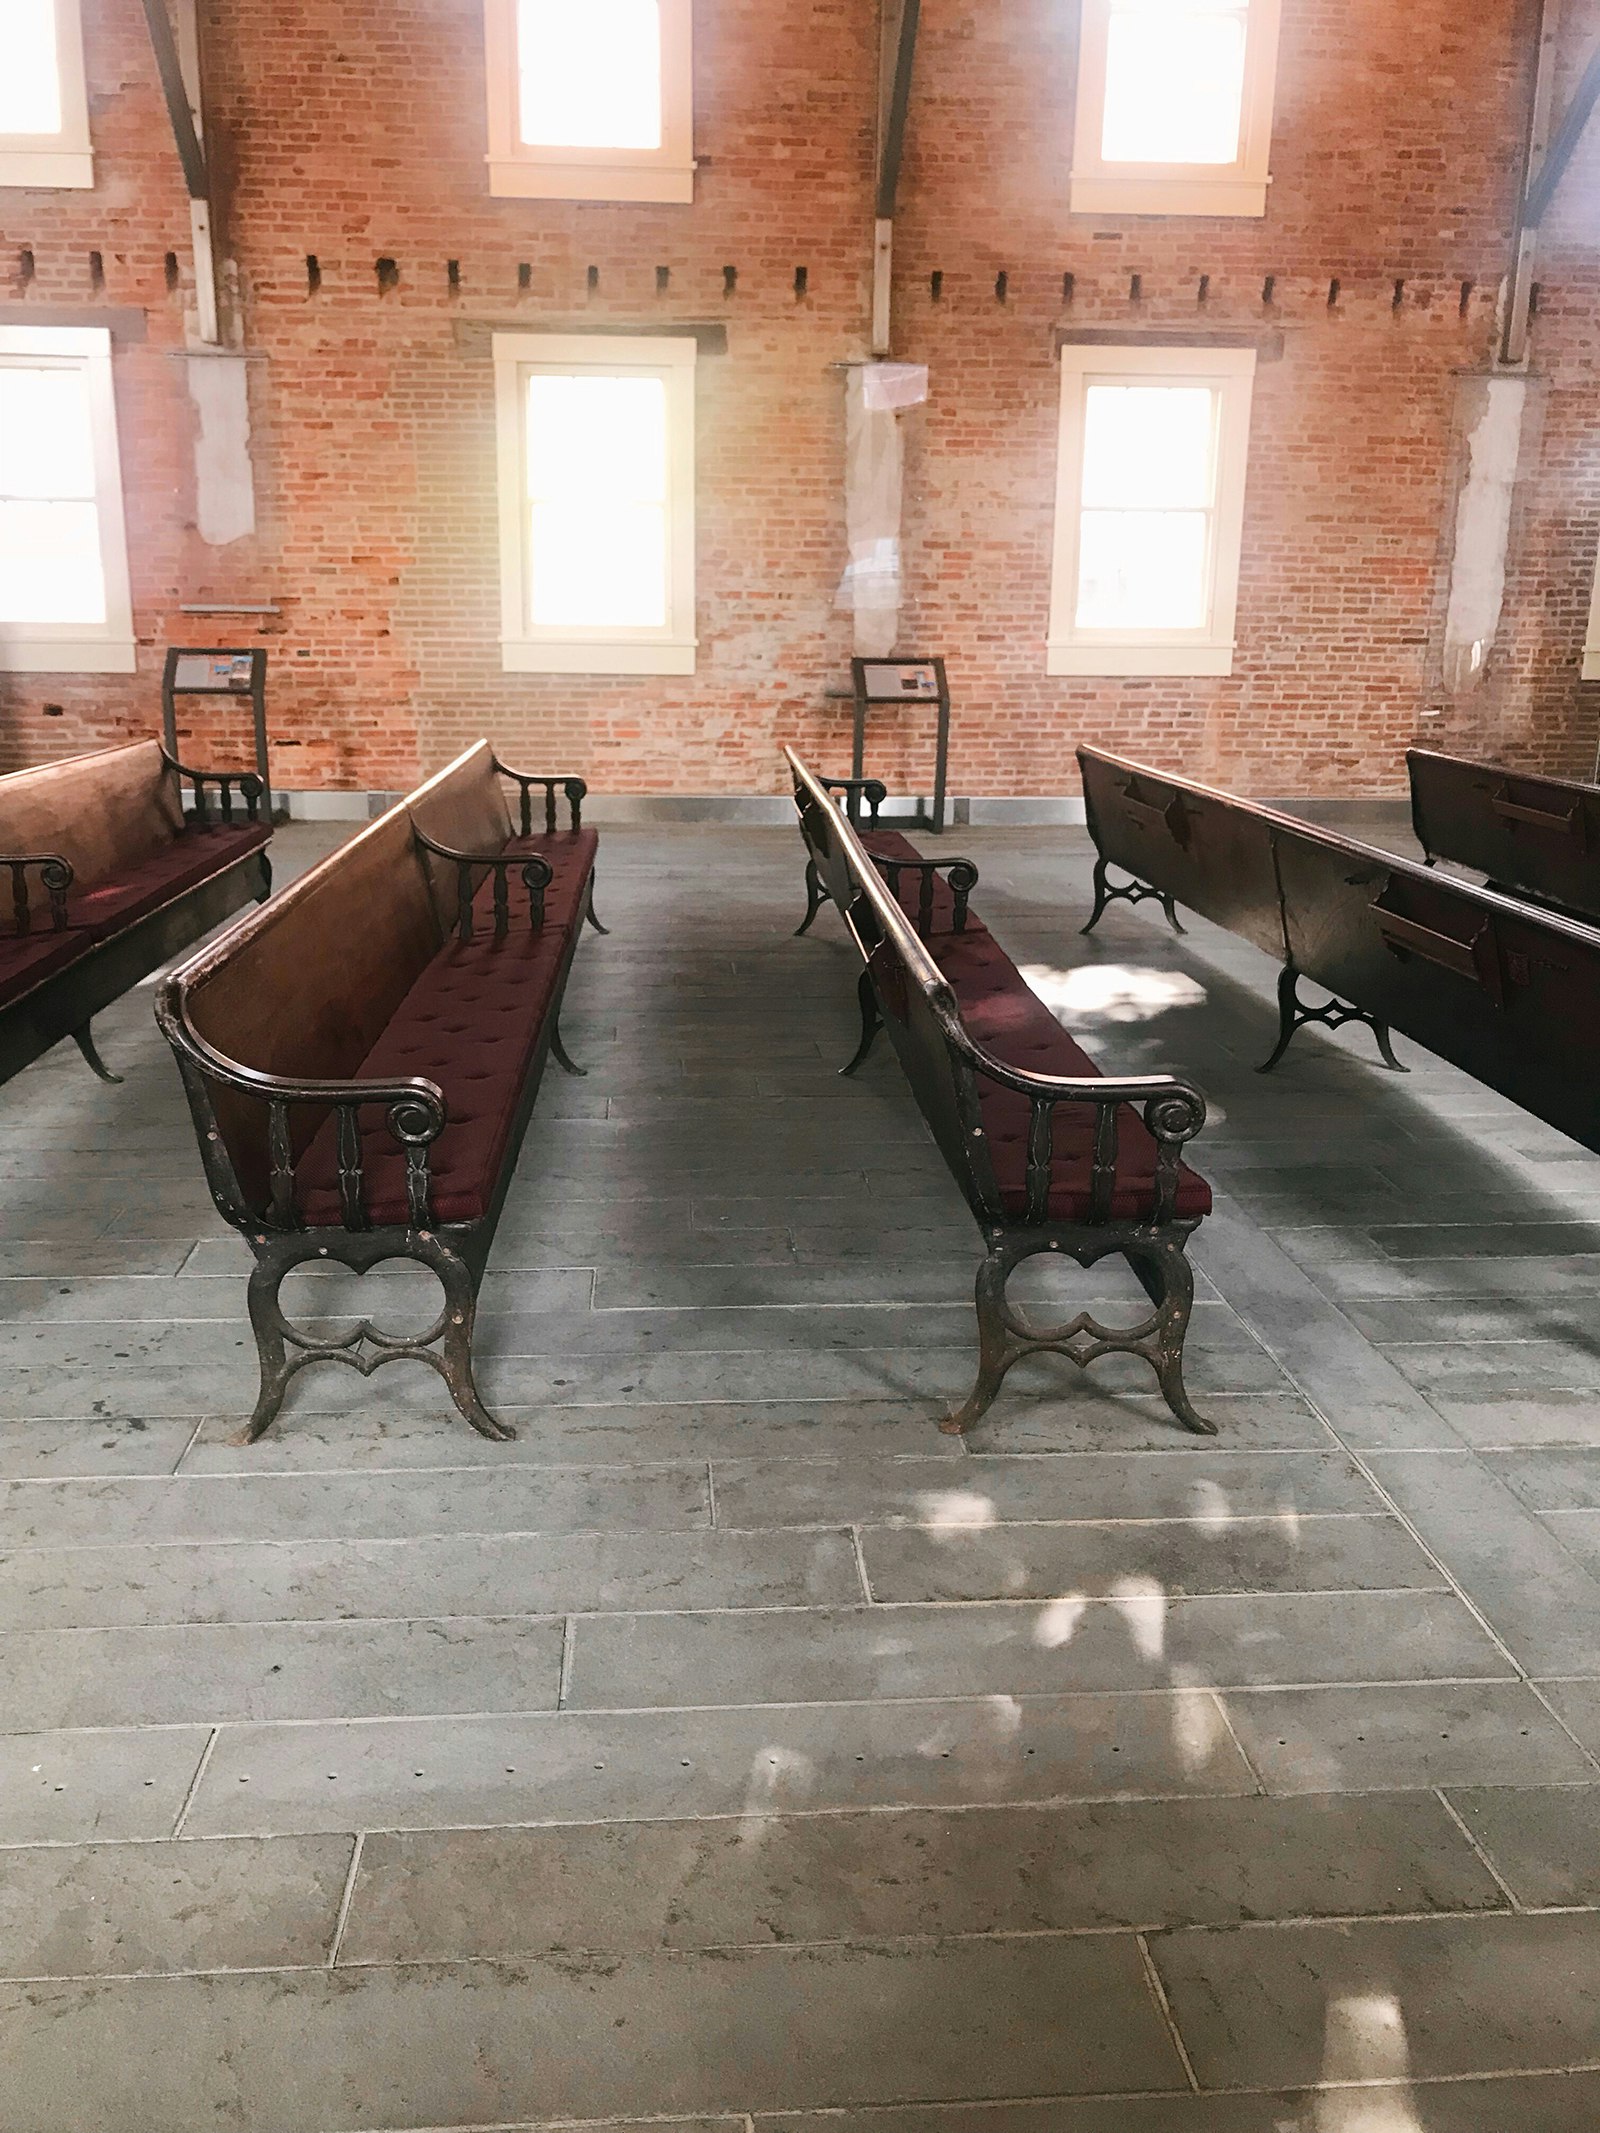 Interior of small brick chapel full of natural light and ornate original wooden pews© Mikki Brammer / Lonely Planet 